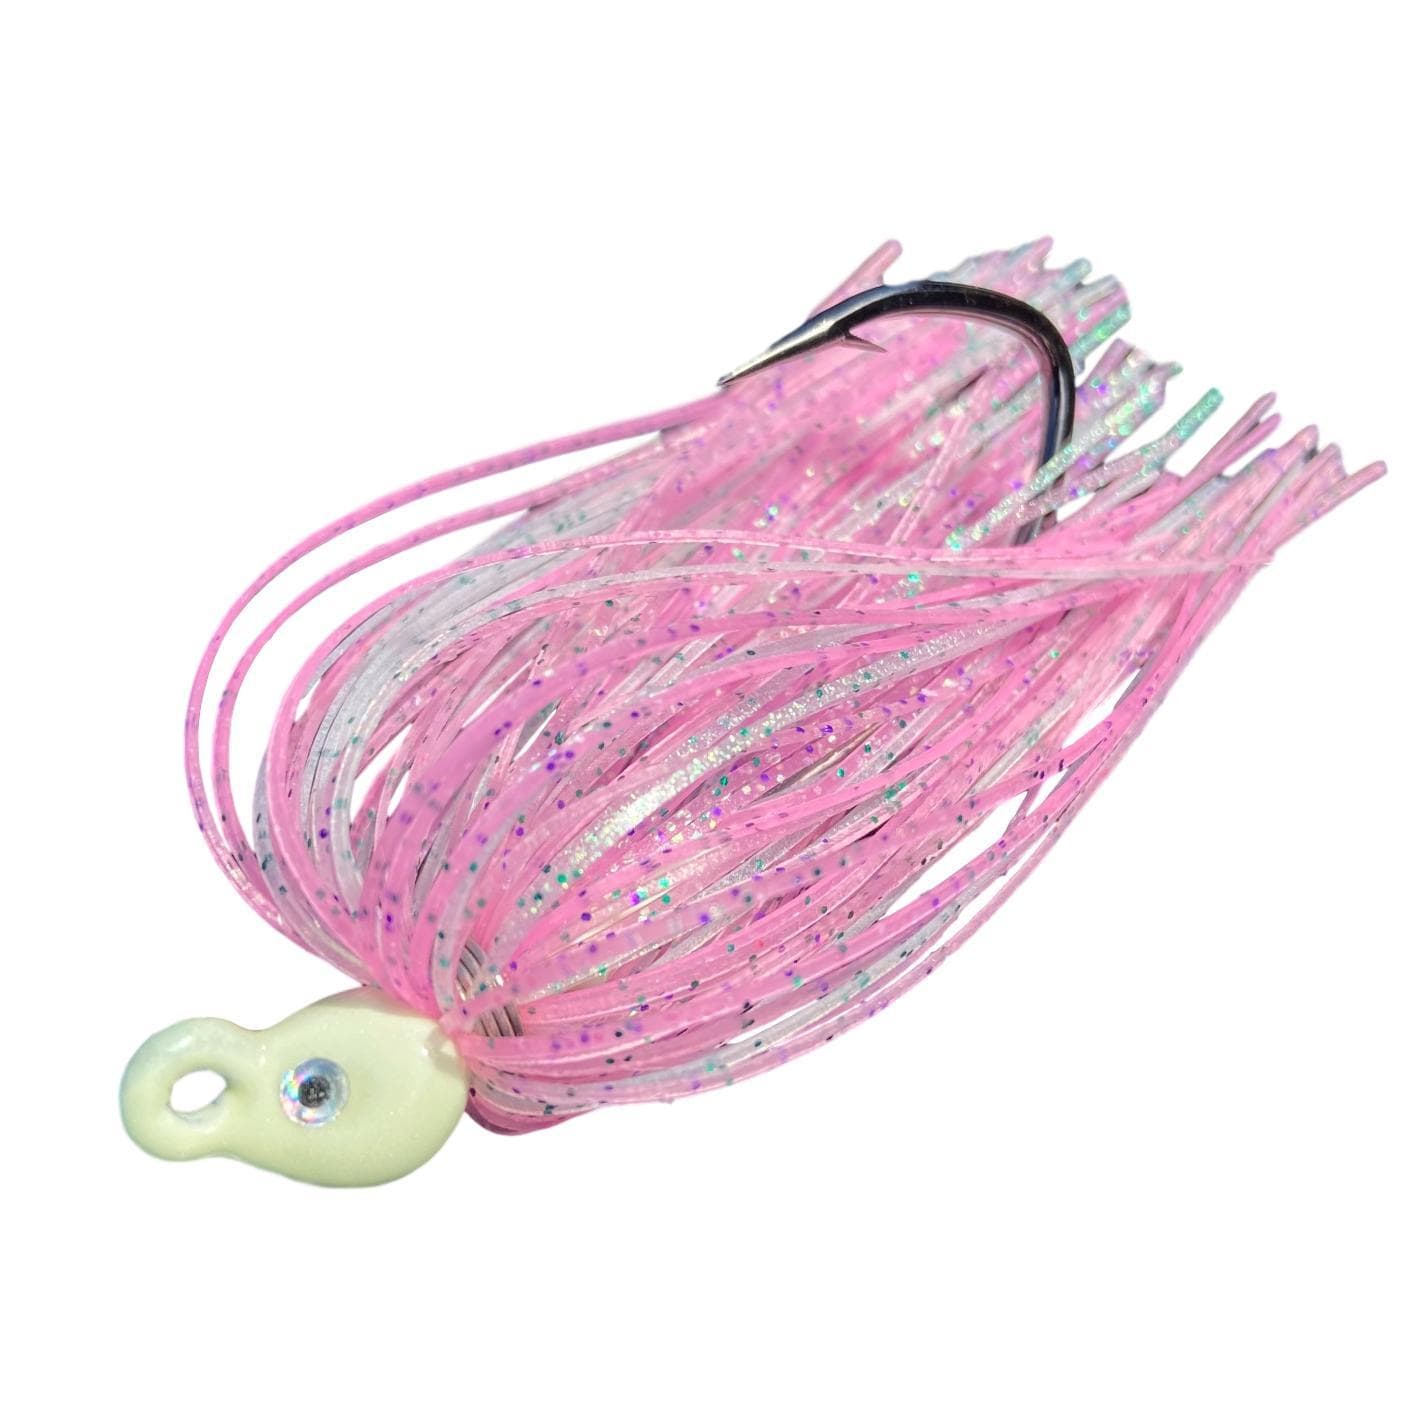 How to paint soft plastic baits best lures for trout fishing SPIKE